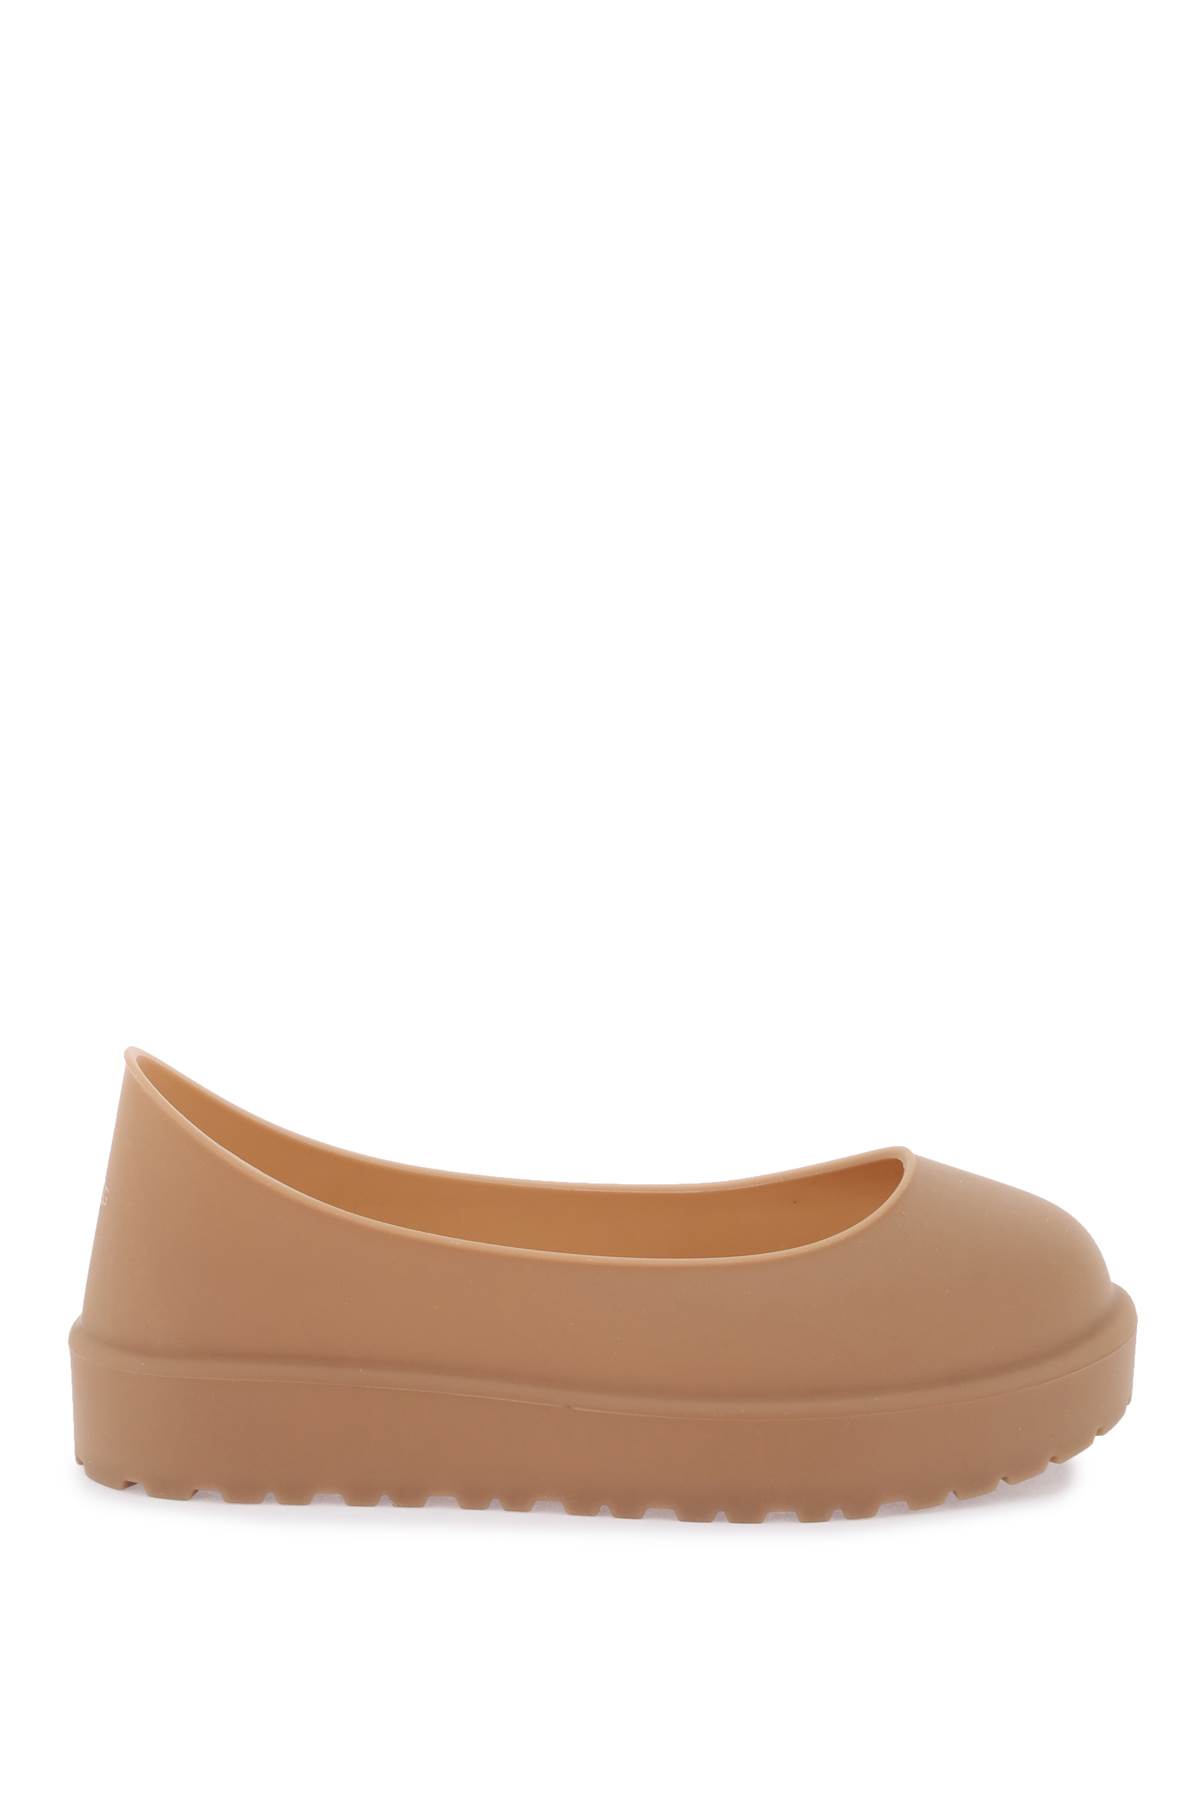 Ugg Guard Shoe Protection In Chestnut